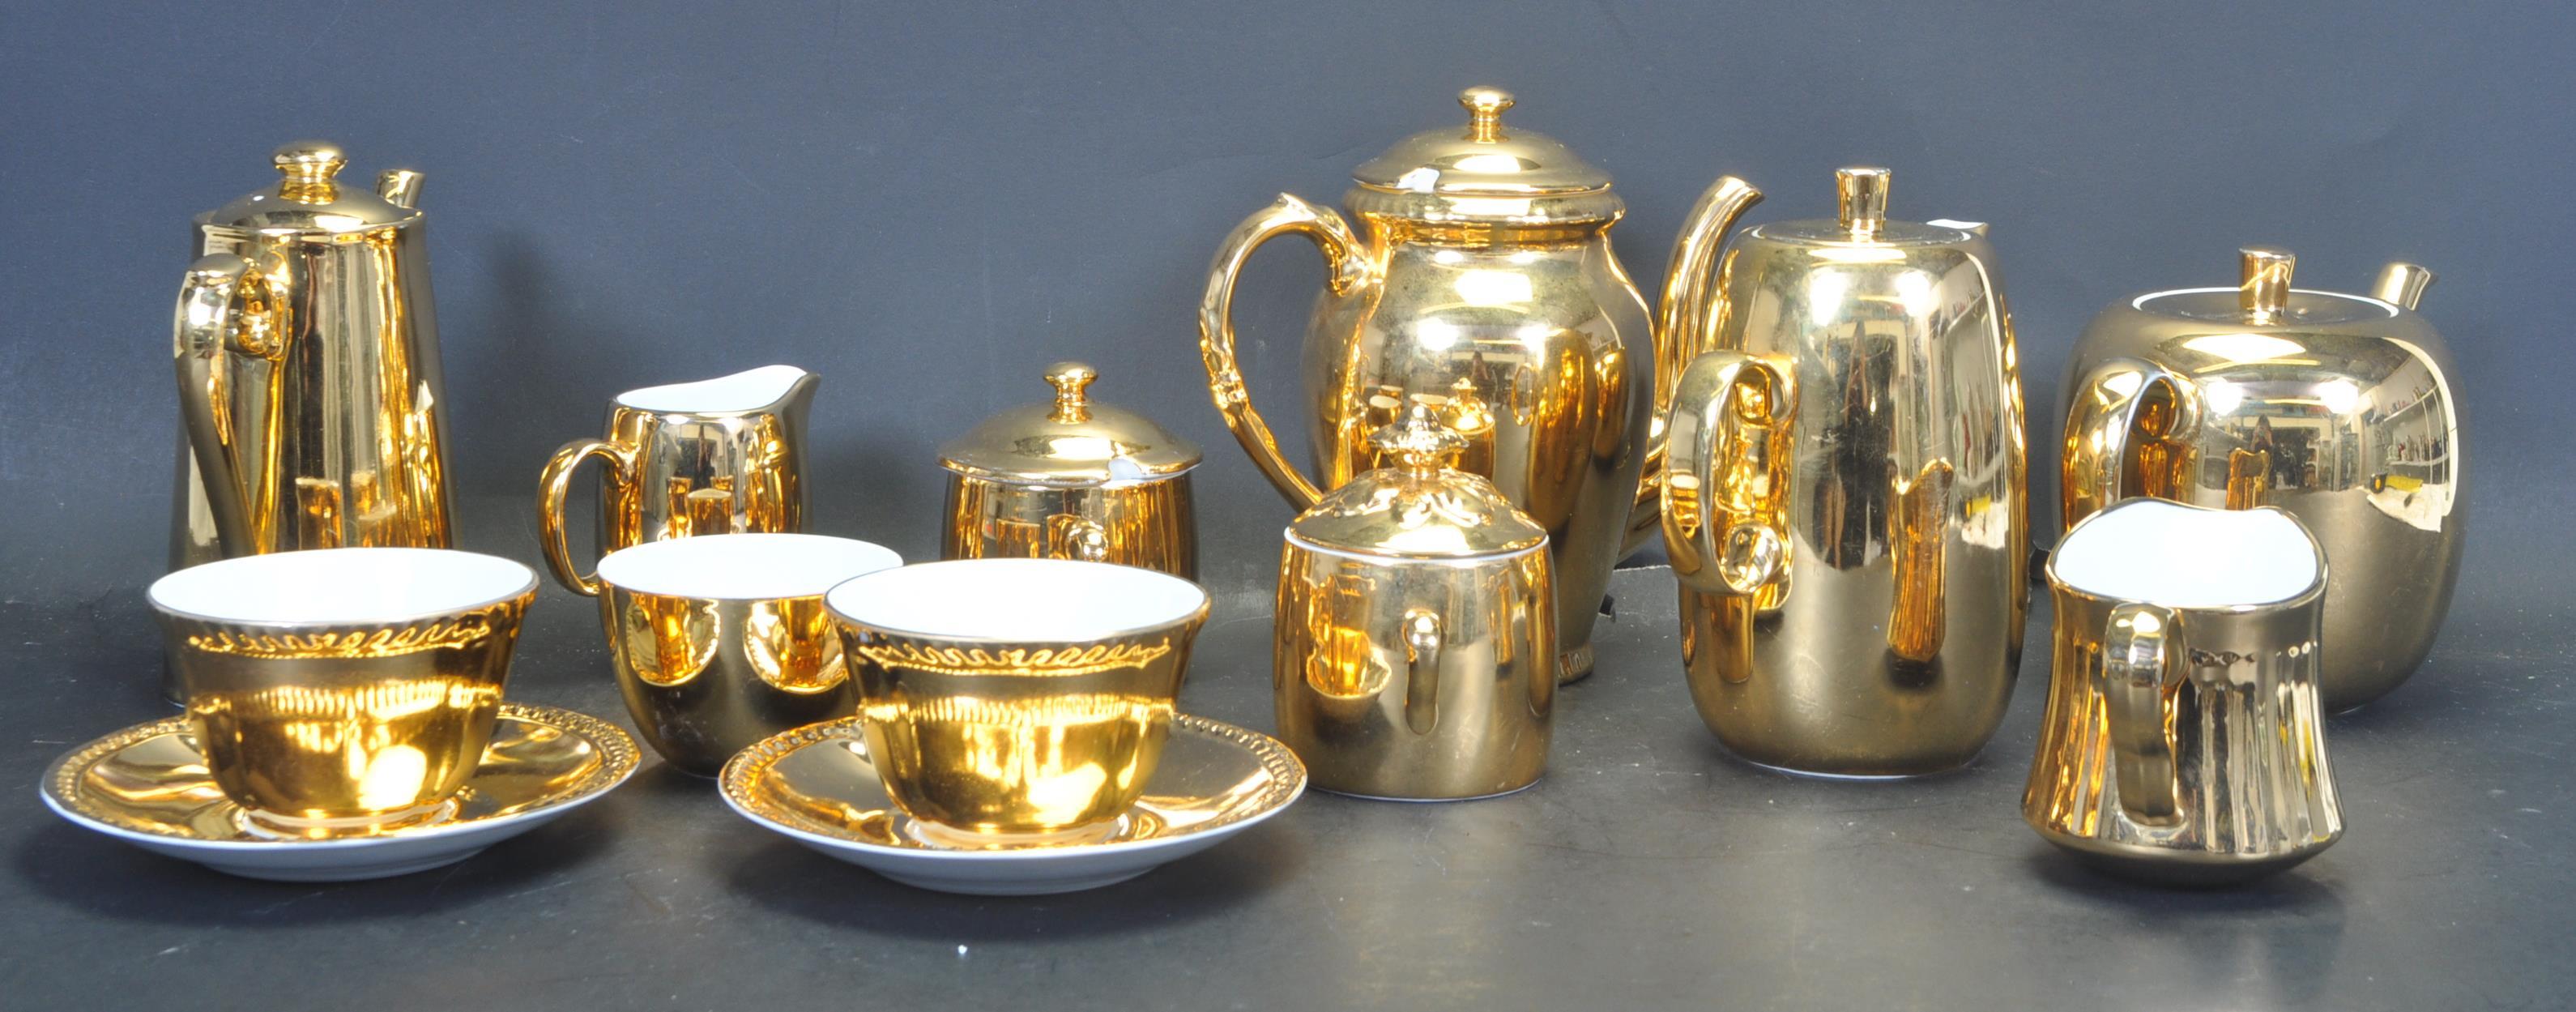 VINTAGE 20TH CENTURY ROYAL WORCESTER GOLD TEA AND COFFEE SERVICE - Image 2 of 6